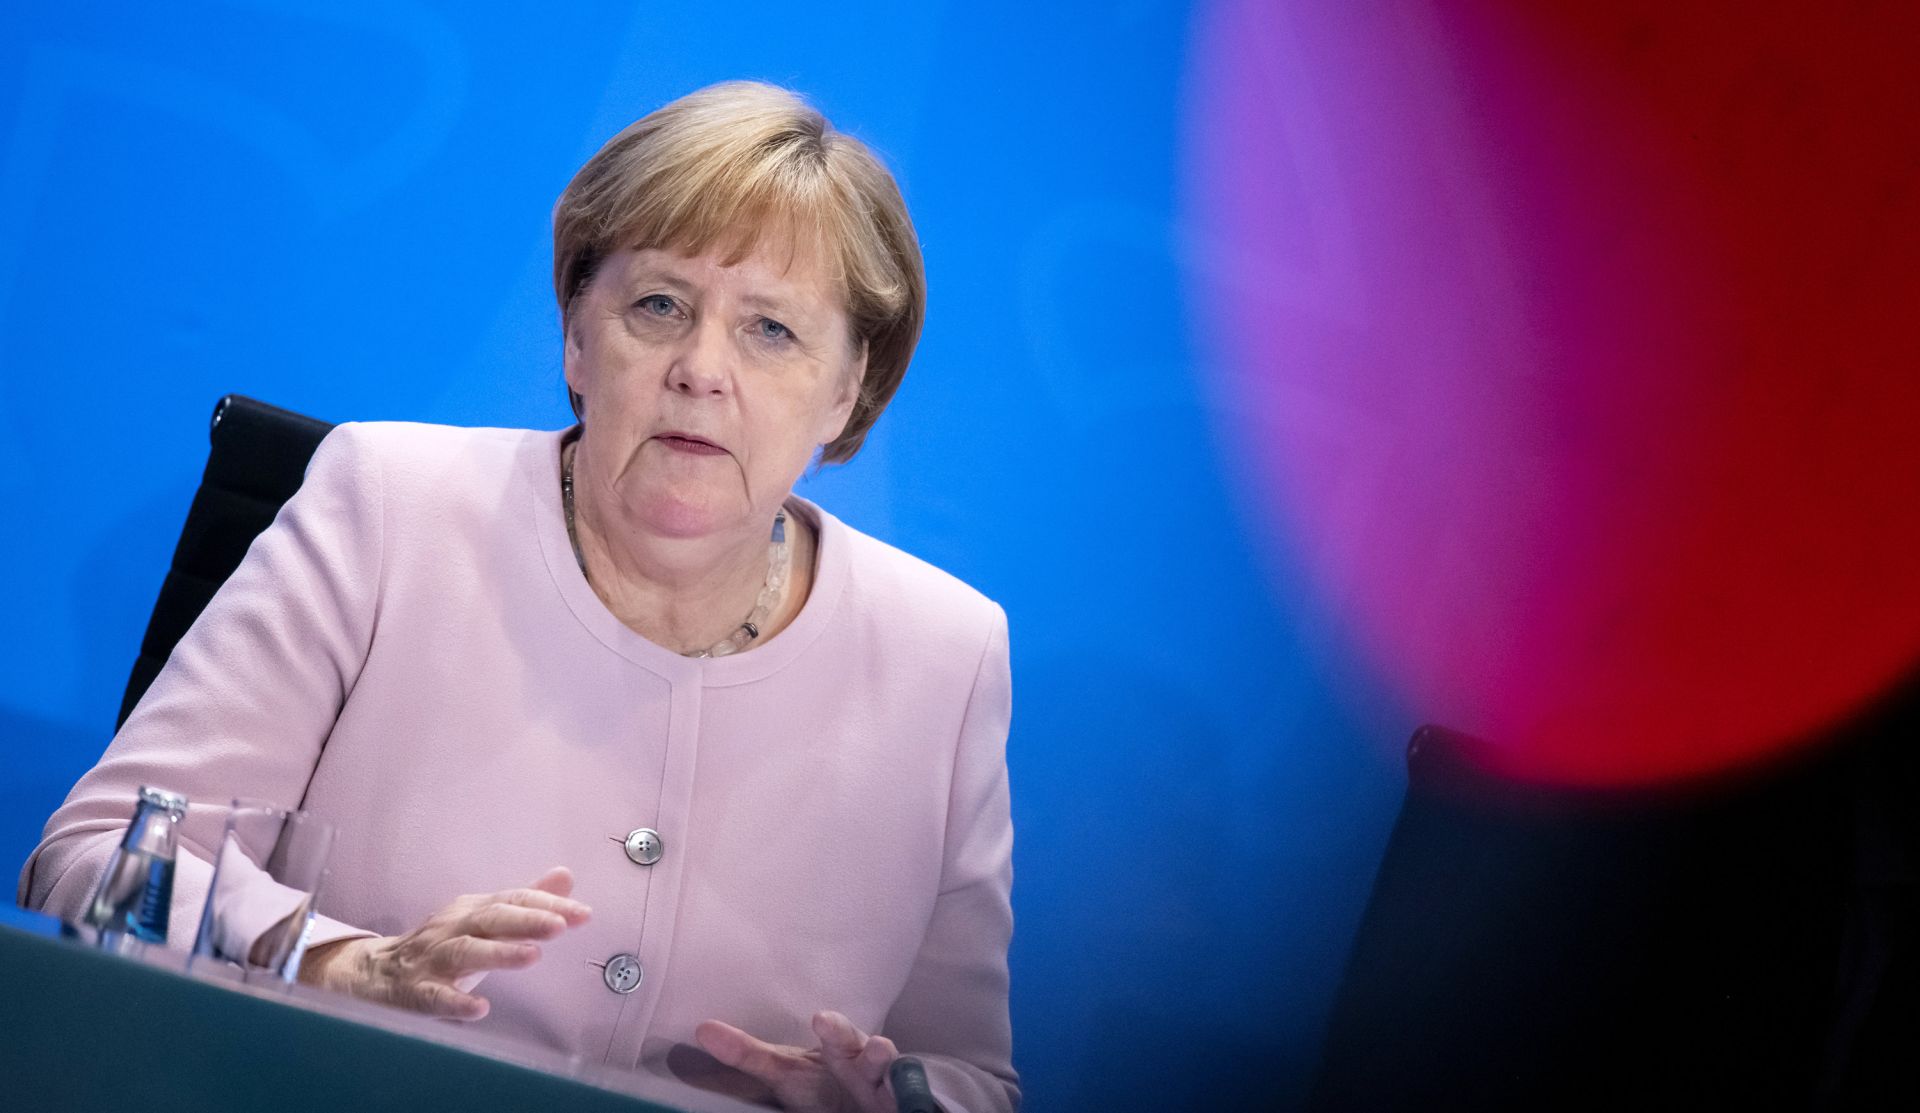 06 June 2019, Berlin: German Chancellor Angela Merkel attends a press conference after the meeting of the Federal Chancellor and the heads of governments of the federal states. Photo: Bernd von Jutrczenka/dpa